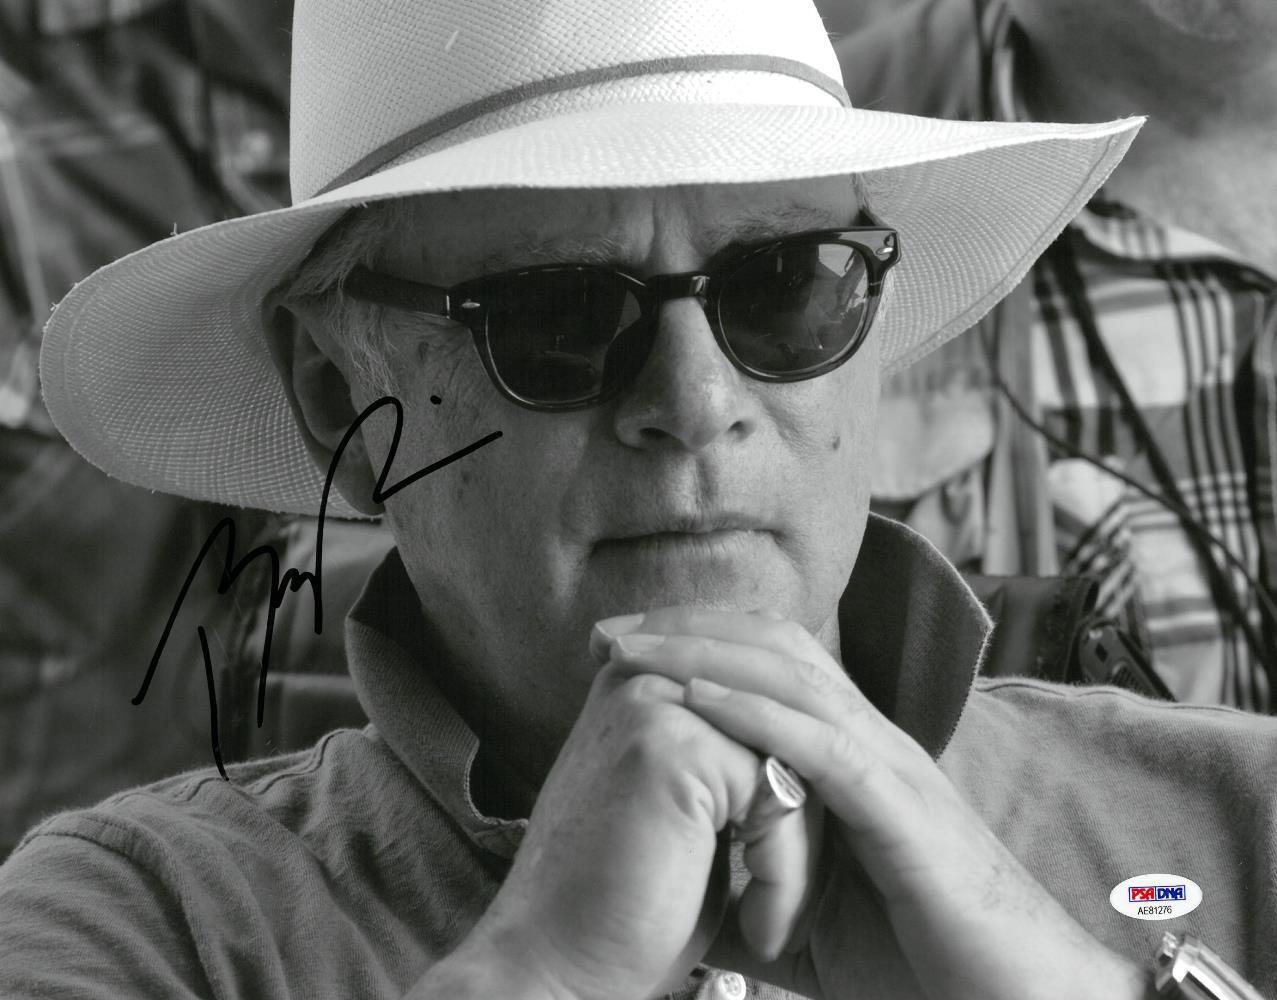 Barry Levinson Signed Authentic Autographed 11x14 Photo Poster painting PSA/DNA #AE81276